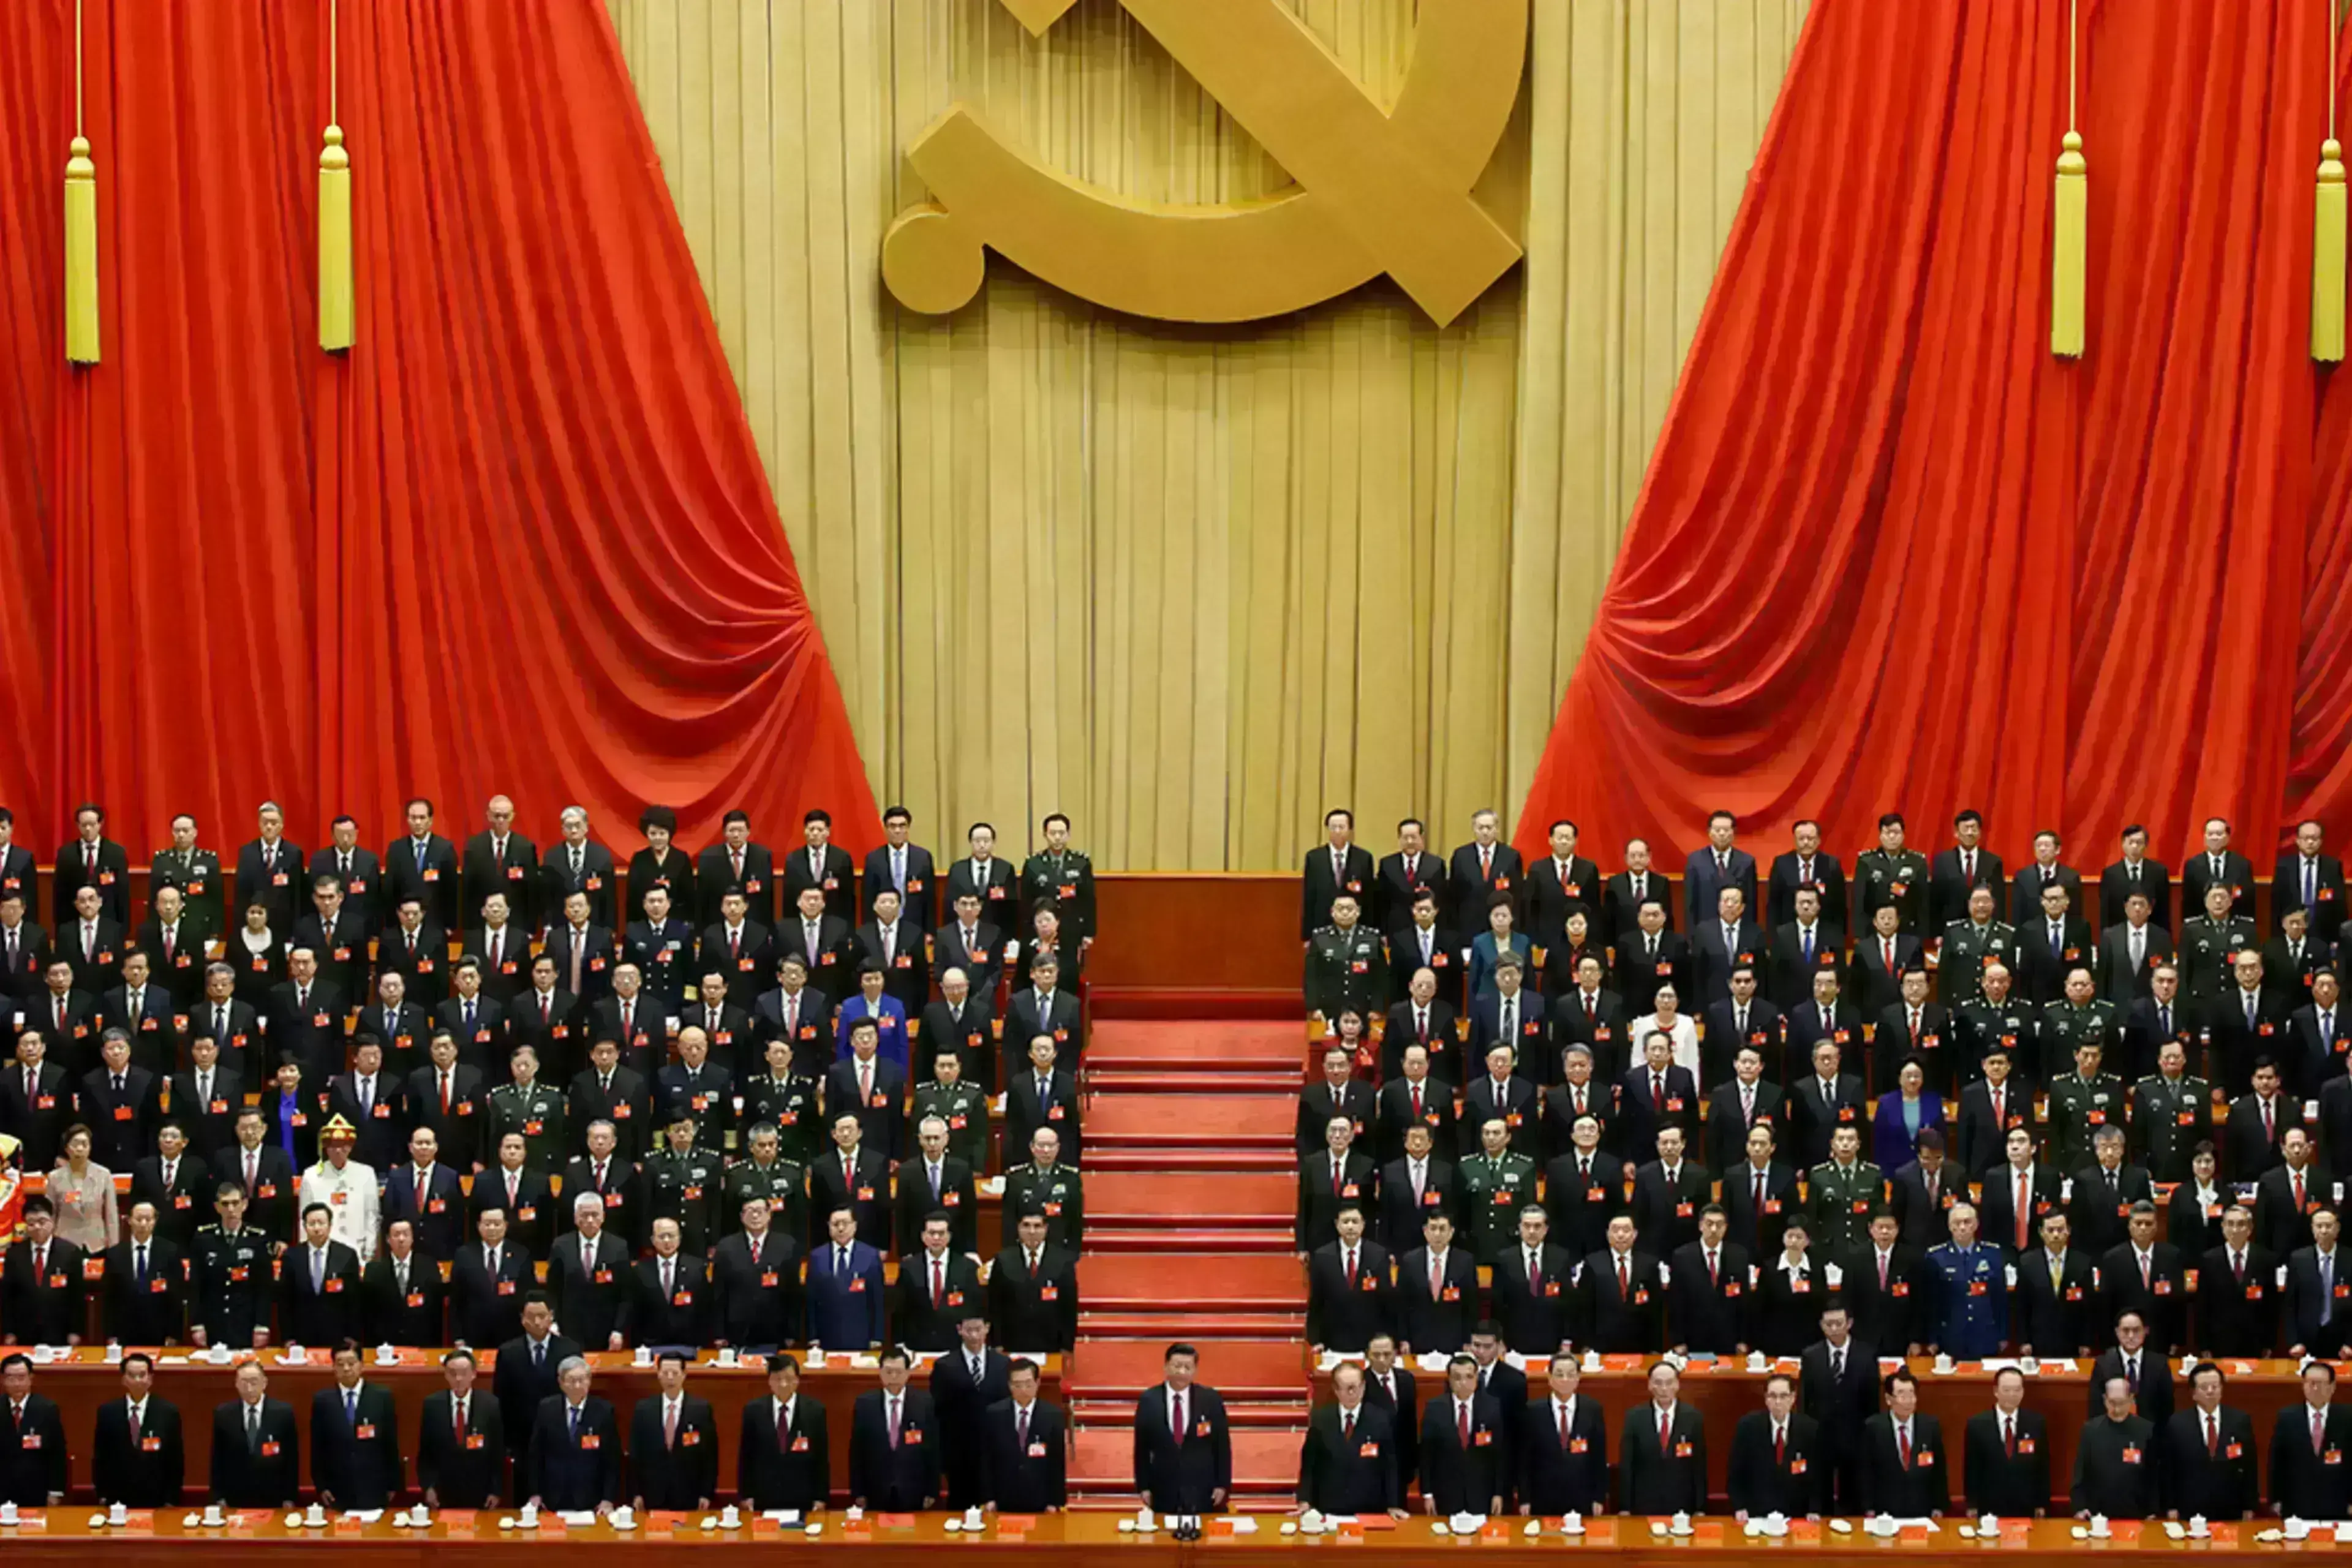 Xi Jinping stands before delegates during the nineteenth National Congress in 2017.